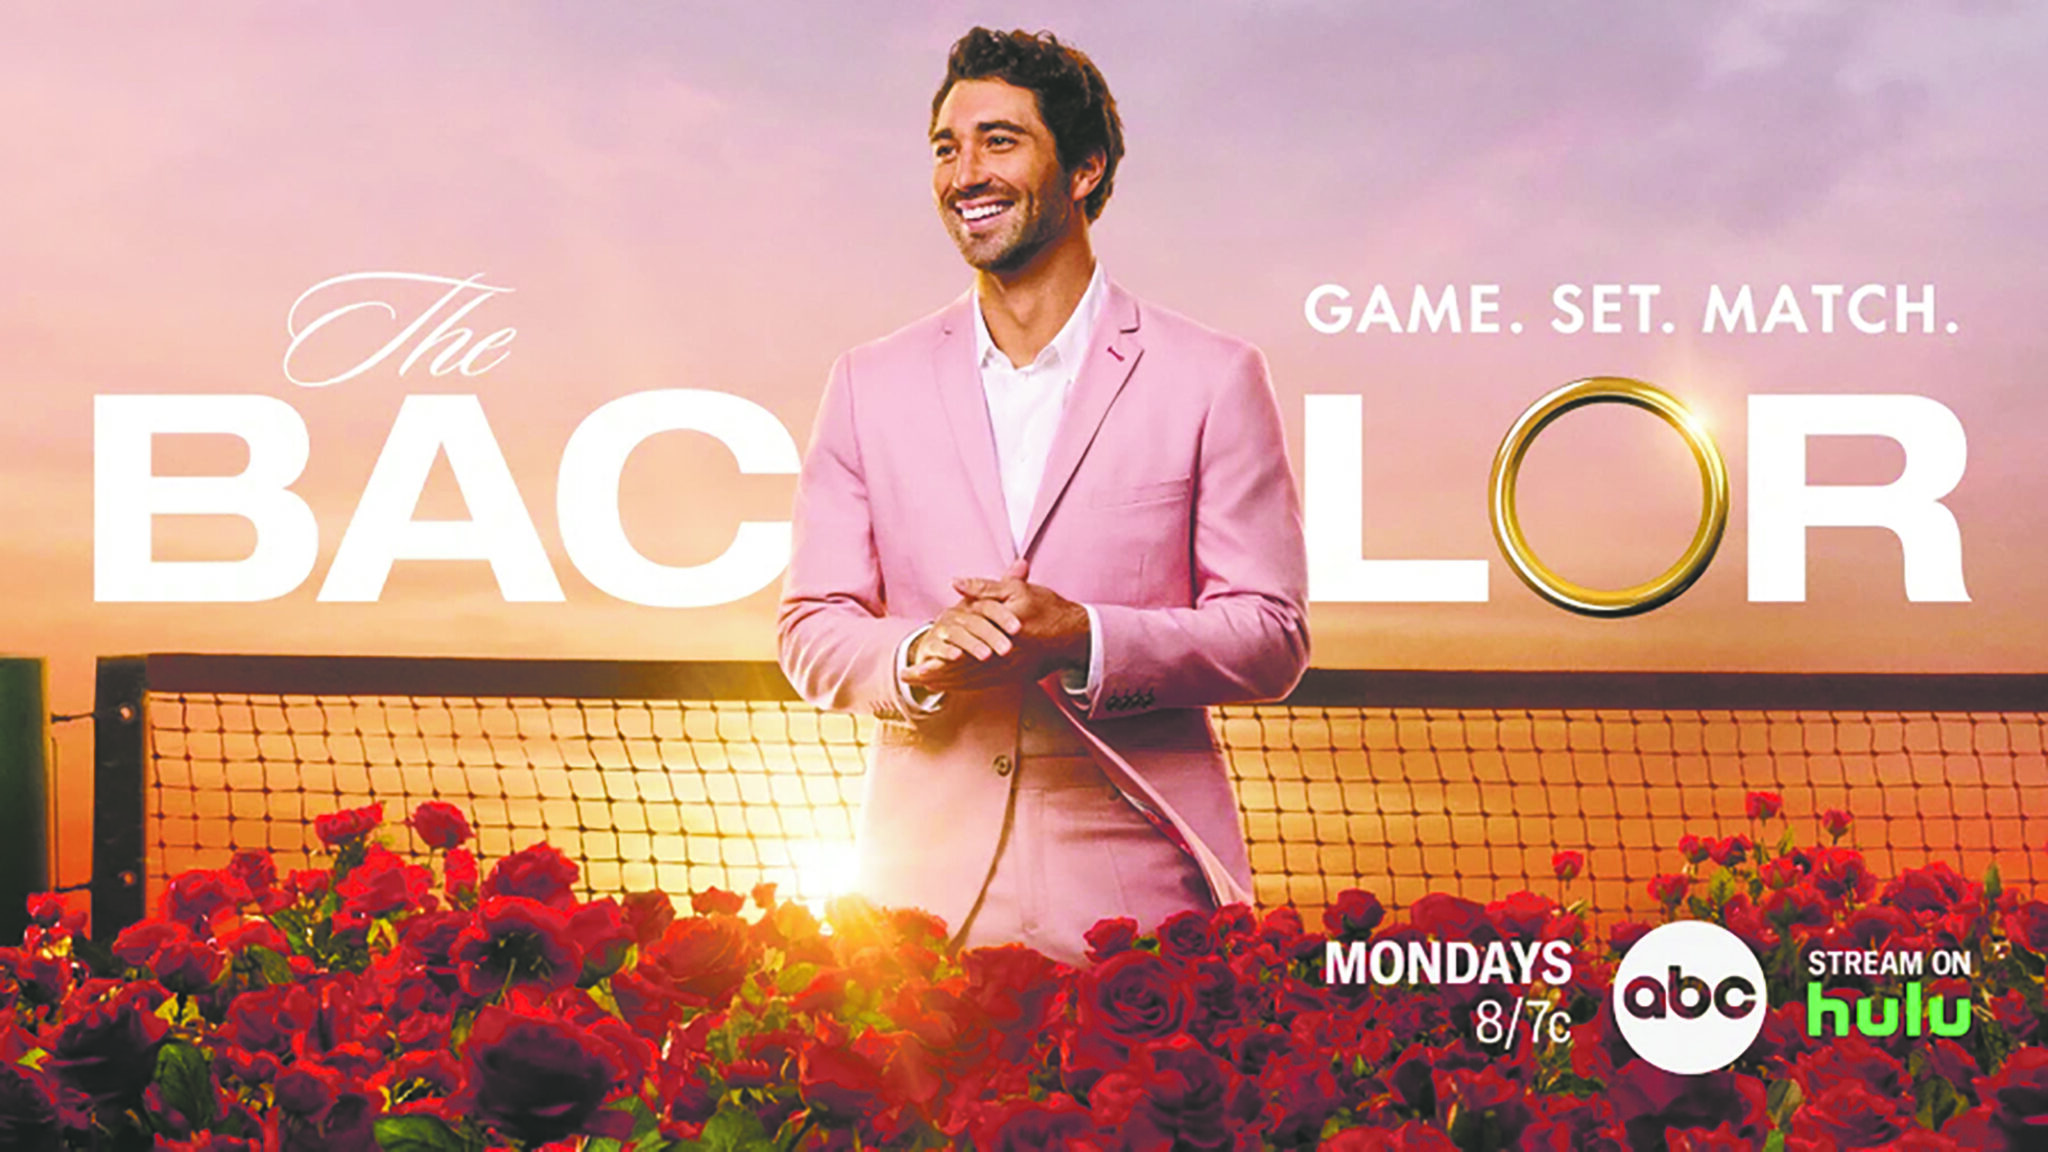 A New Yorker’s Journey On The Bachelor